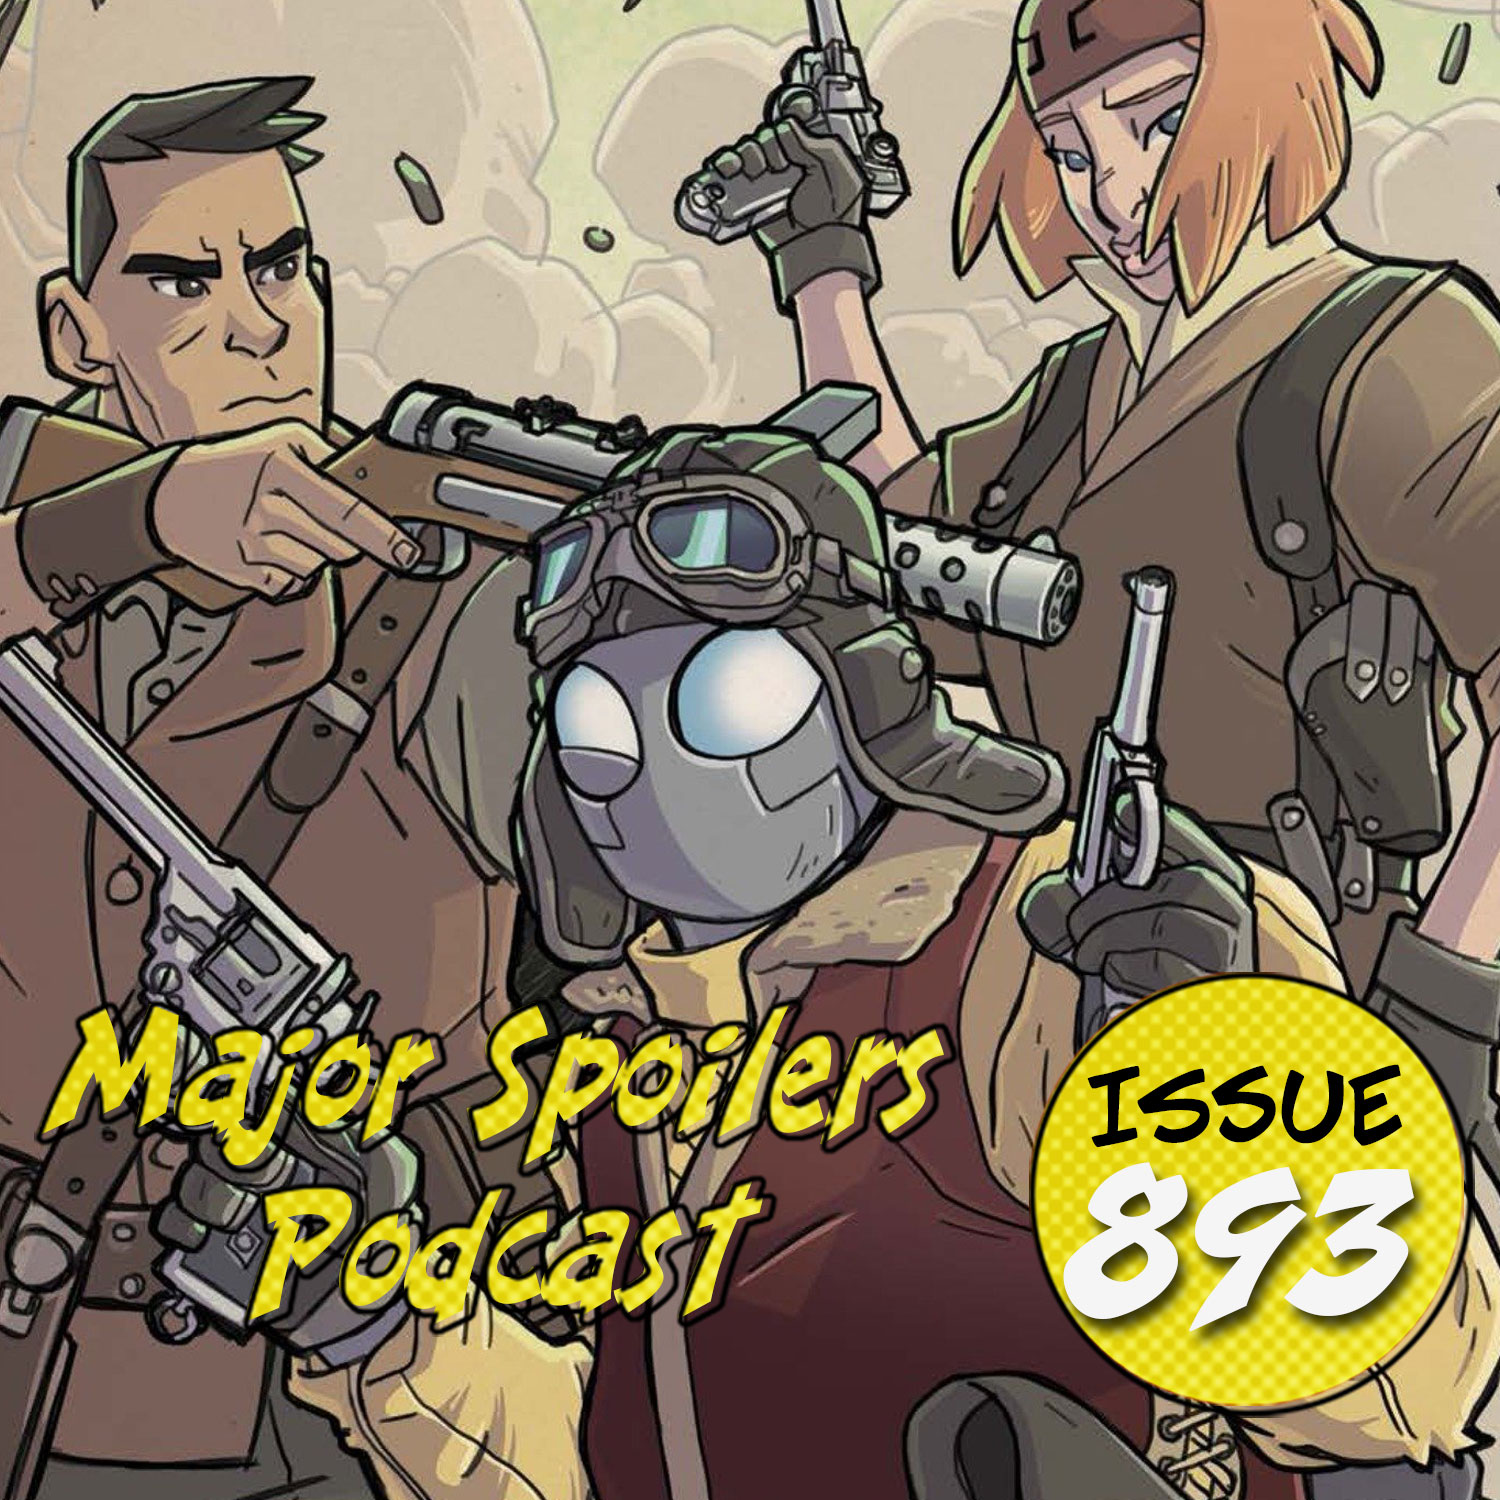 Major Spoilers Podcast #893: Atomic Robo and the Temple of Od